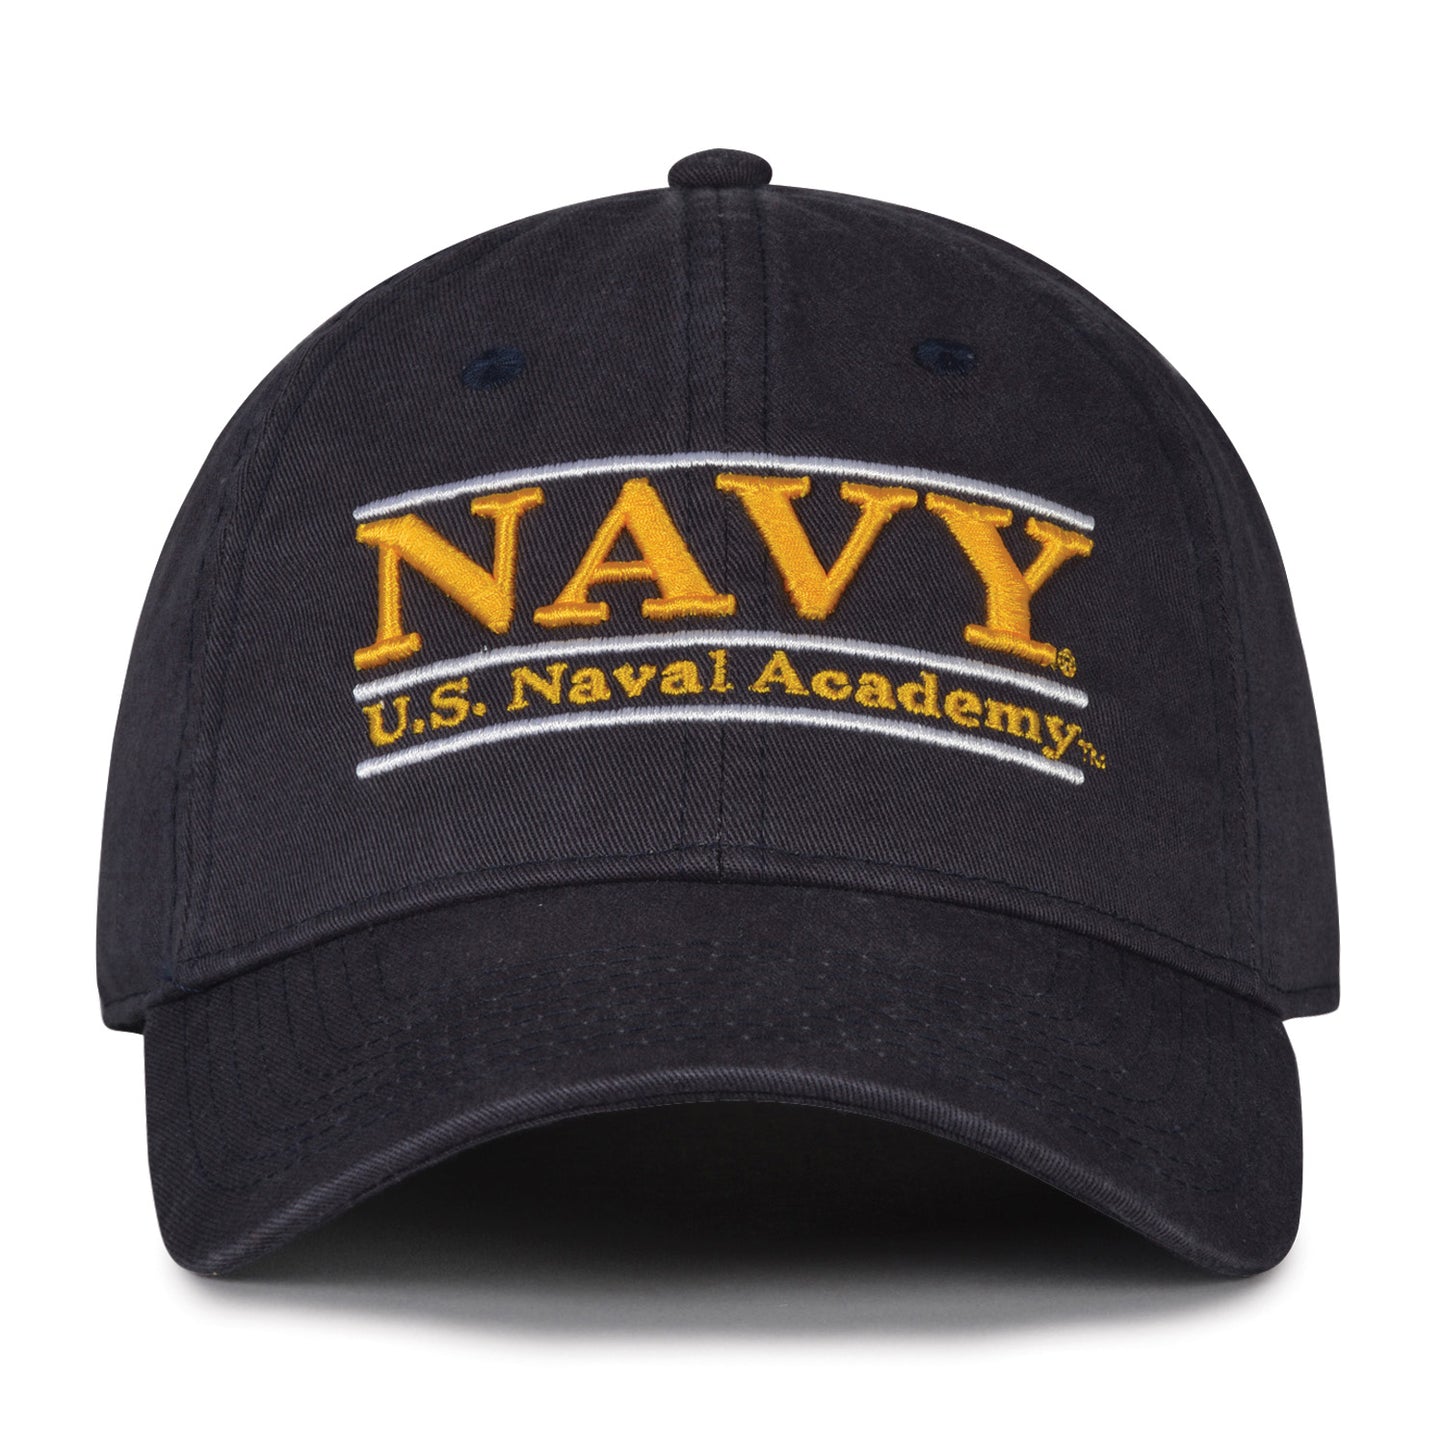 NAVY' RELAXED TWILL BAR – The Game Caps